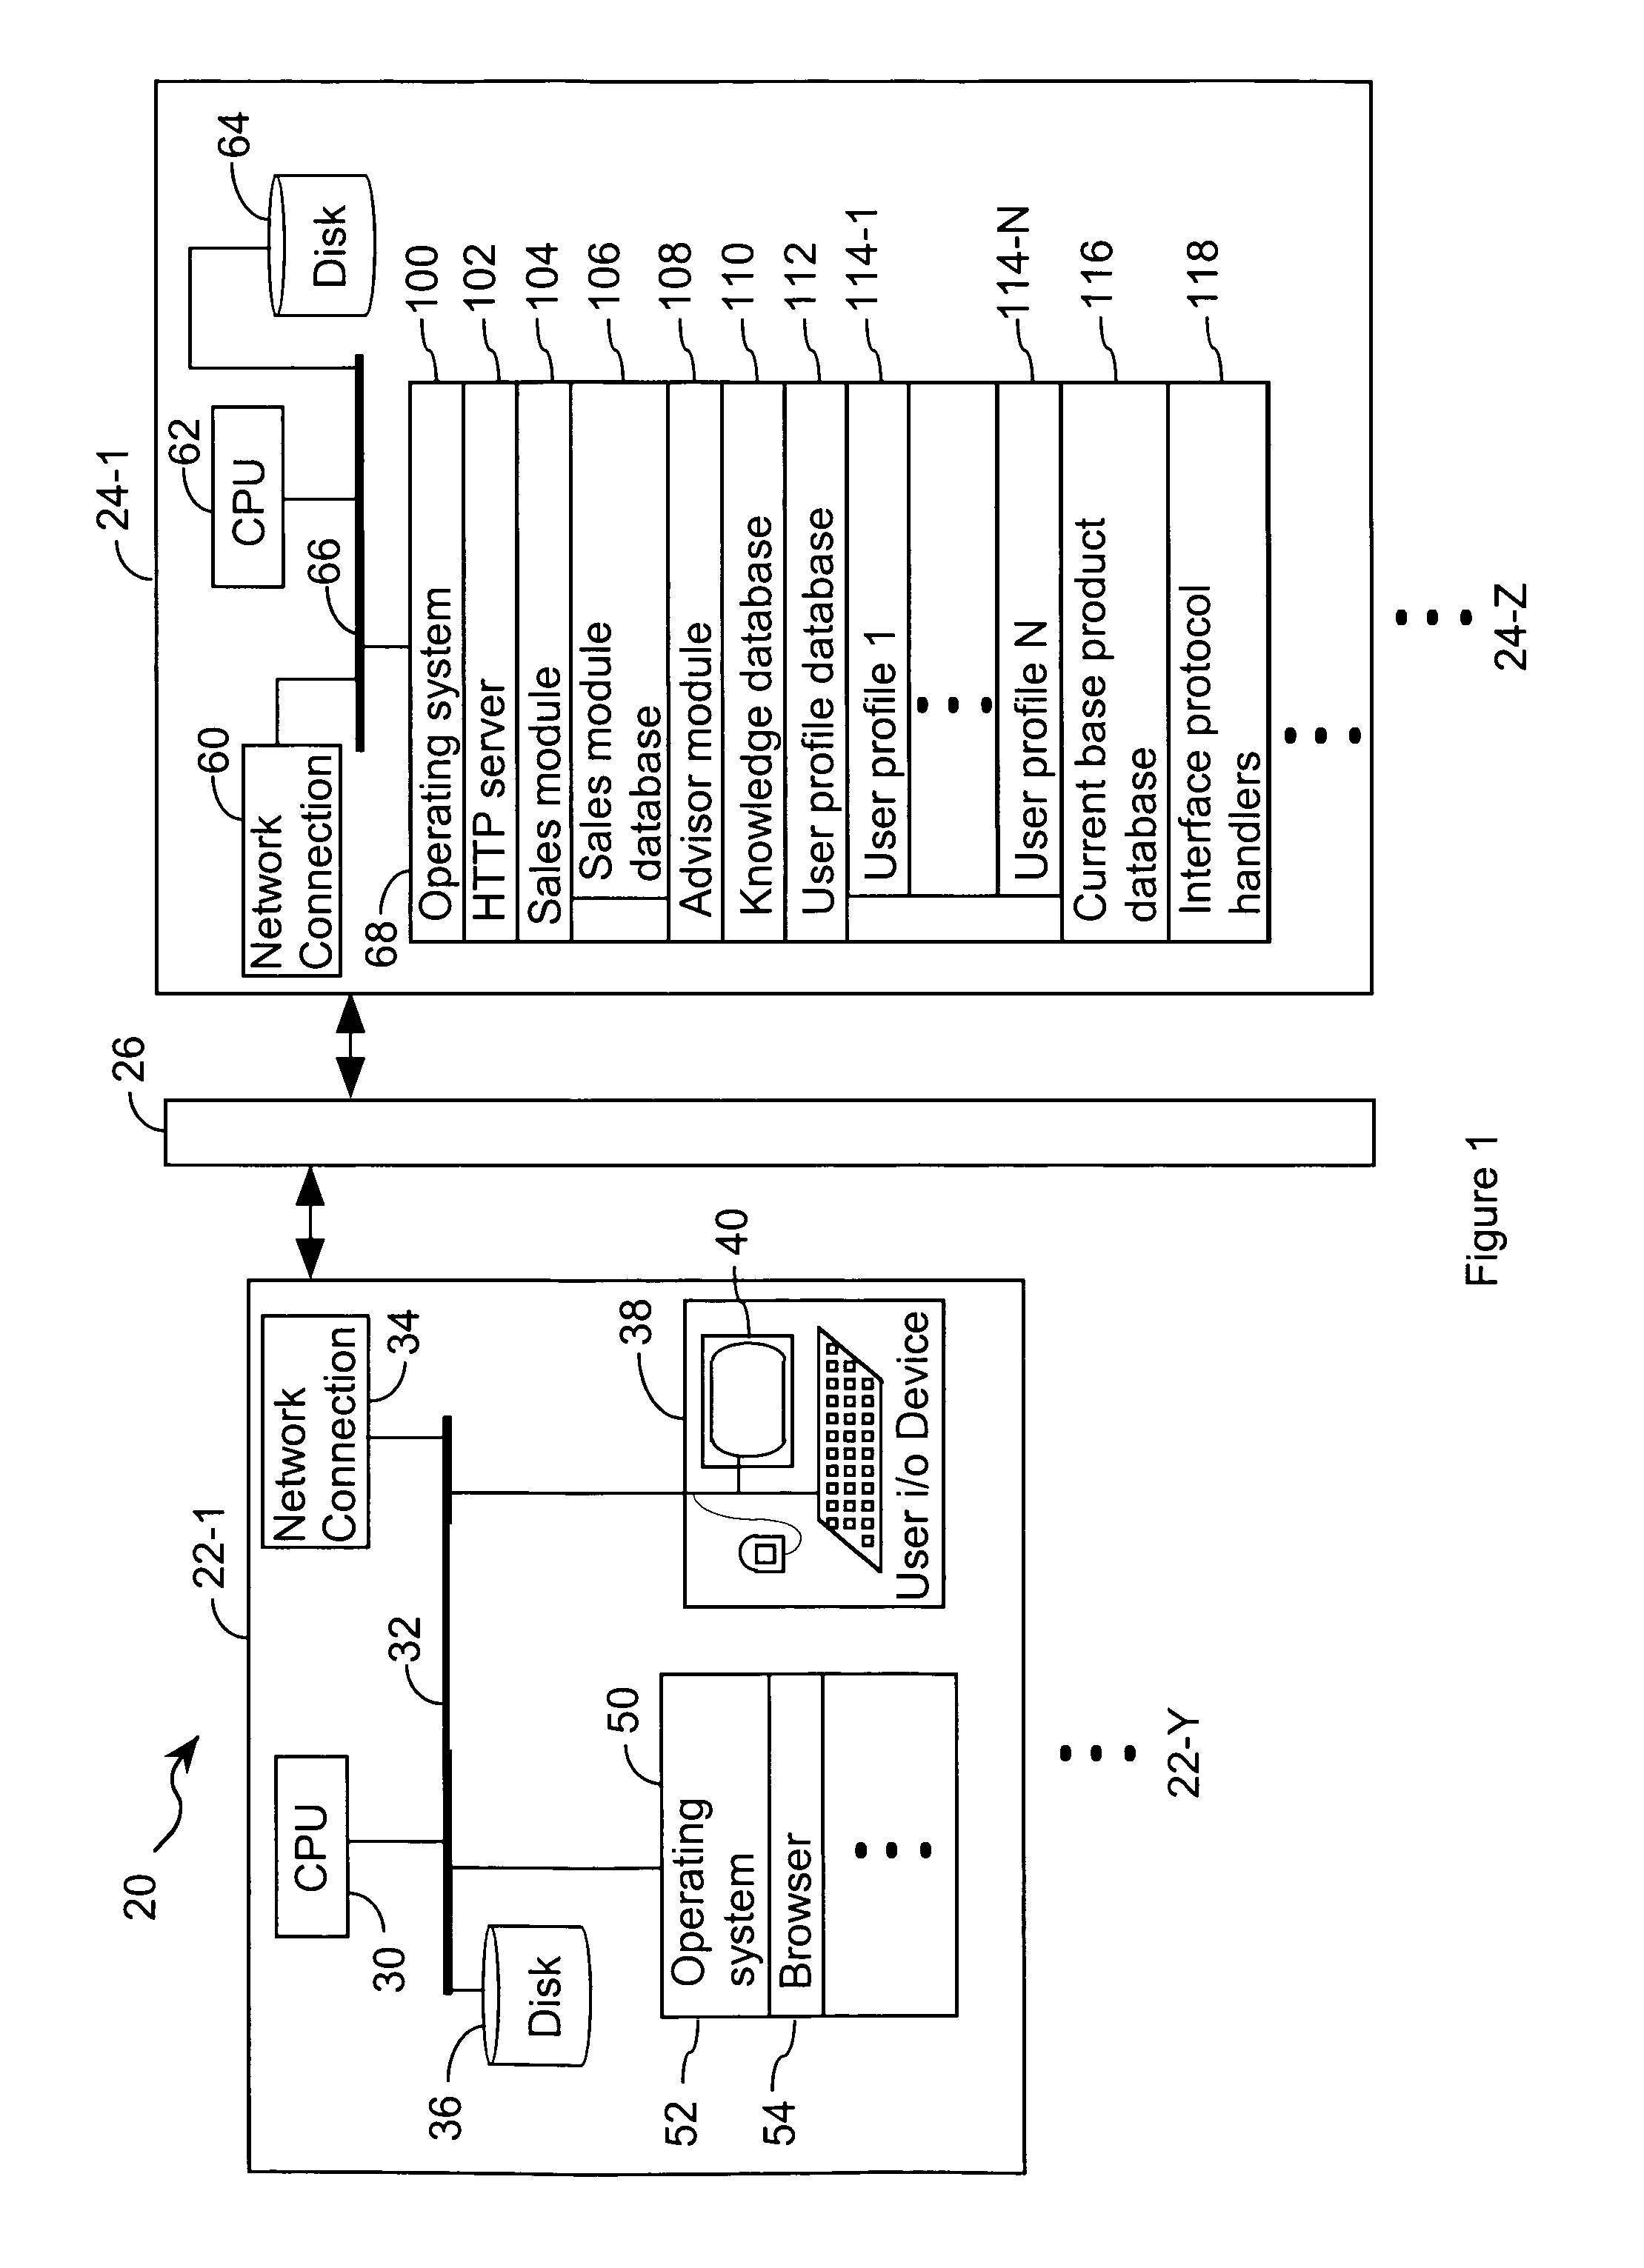 System and method for optimizing a product configuration